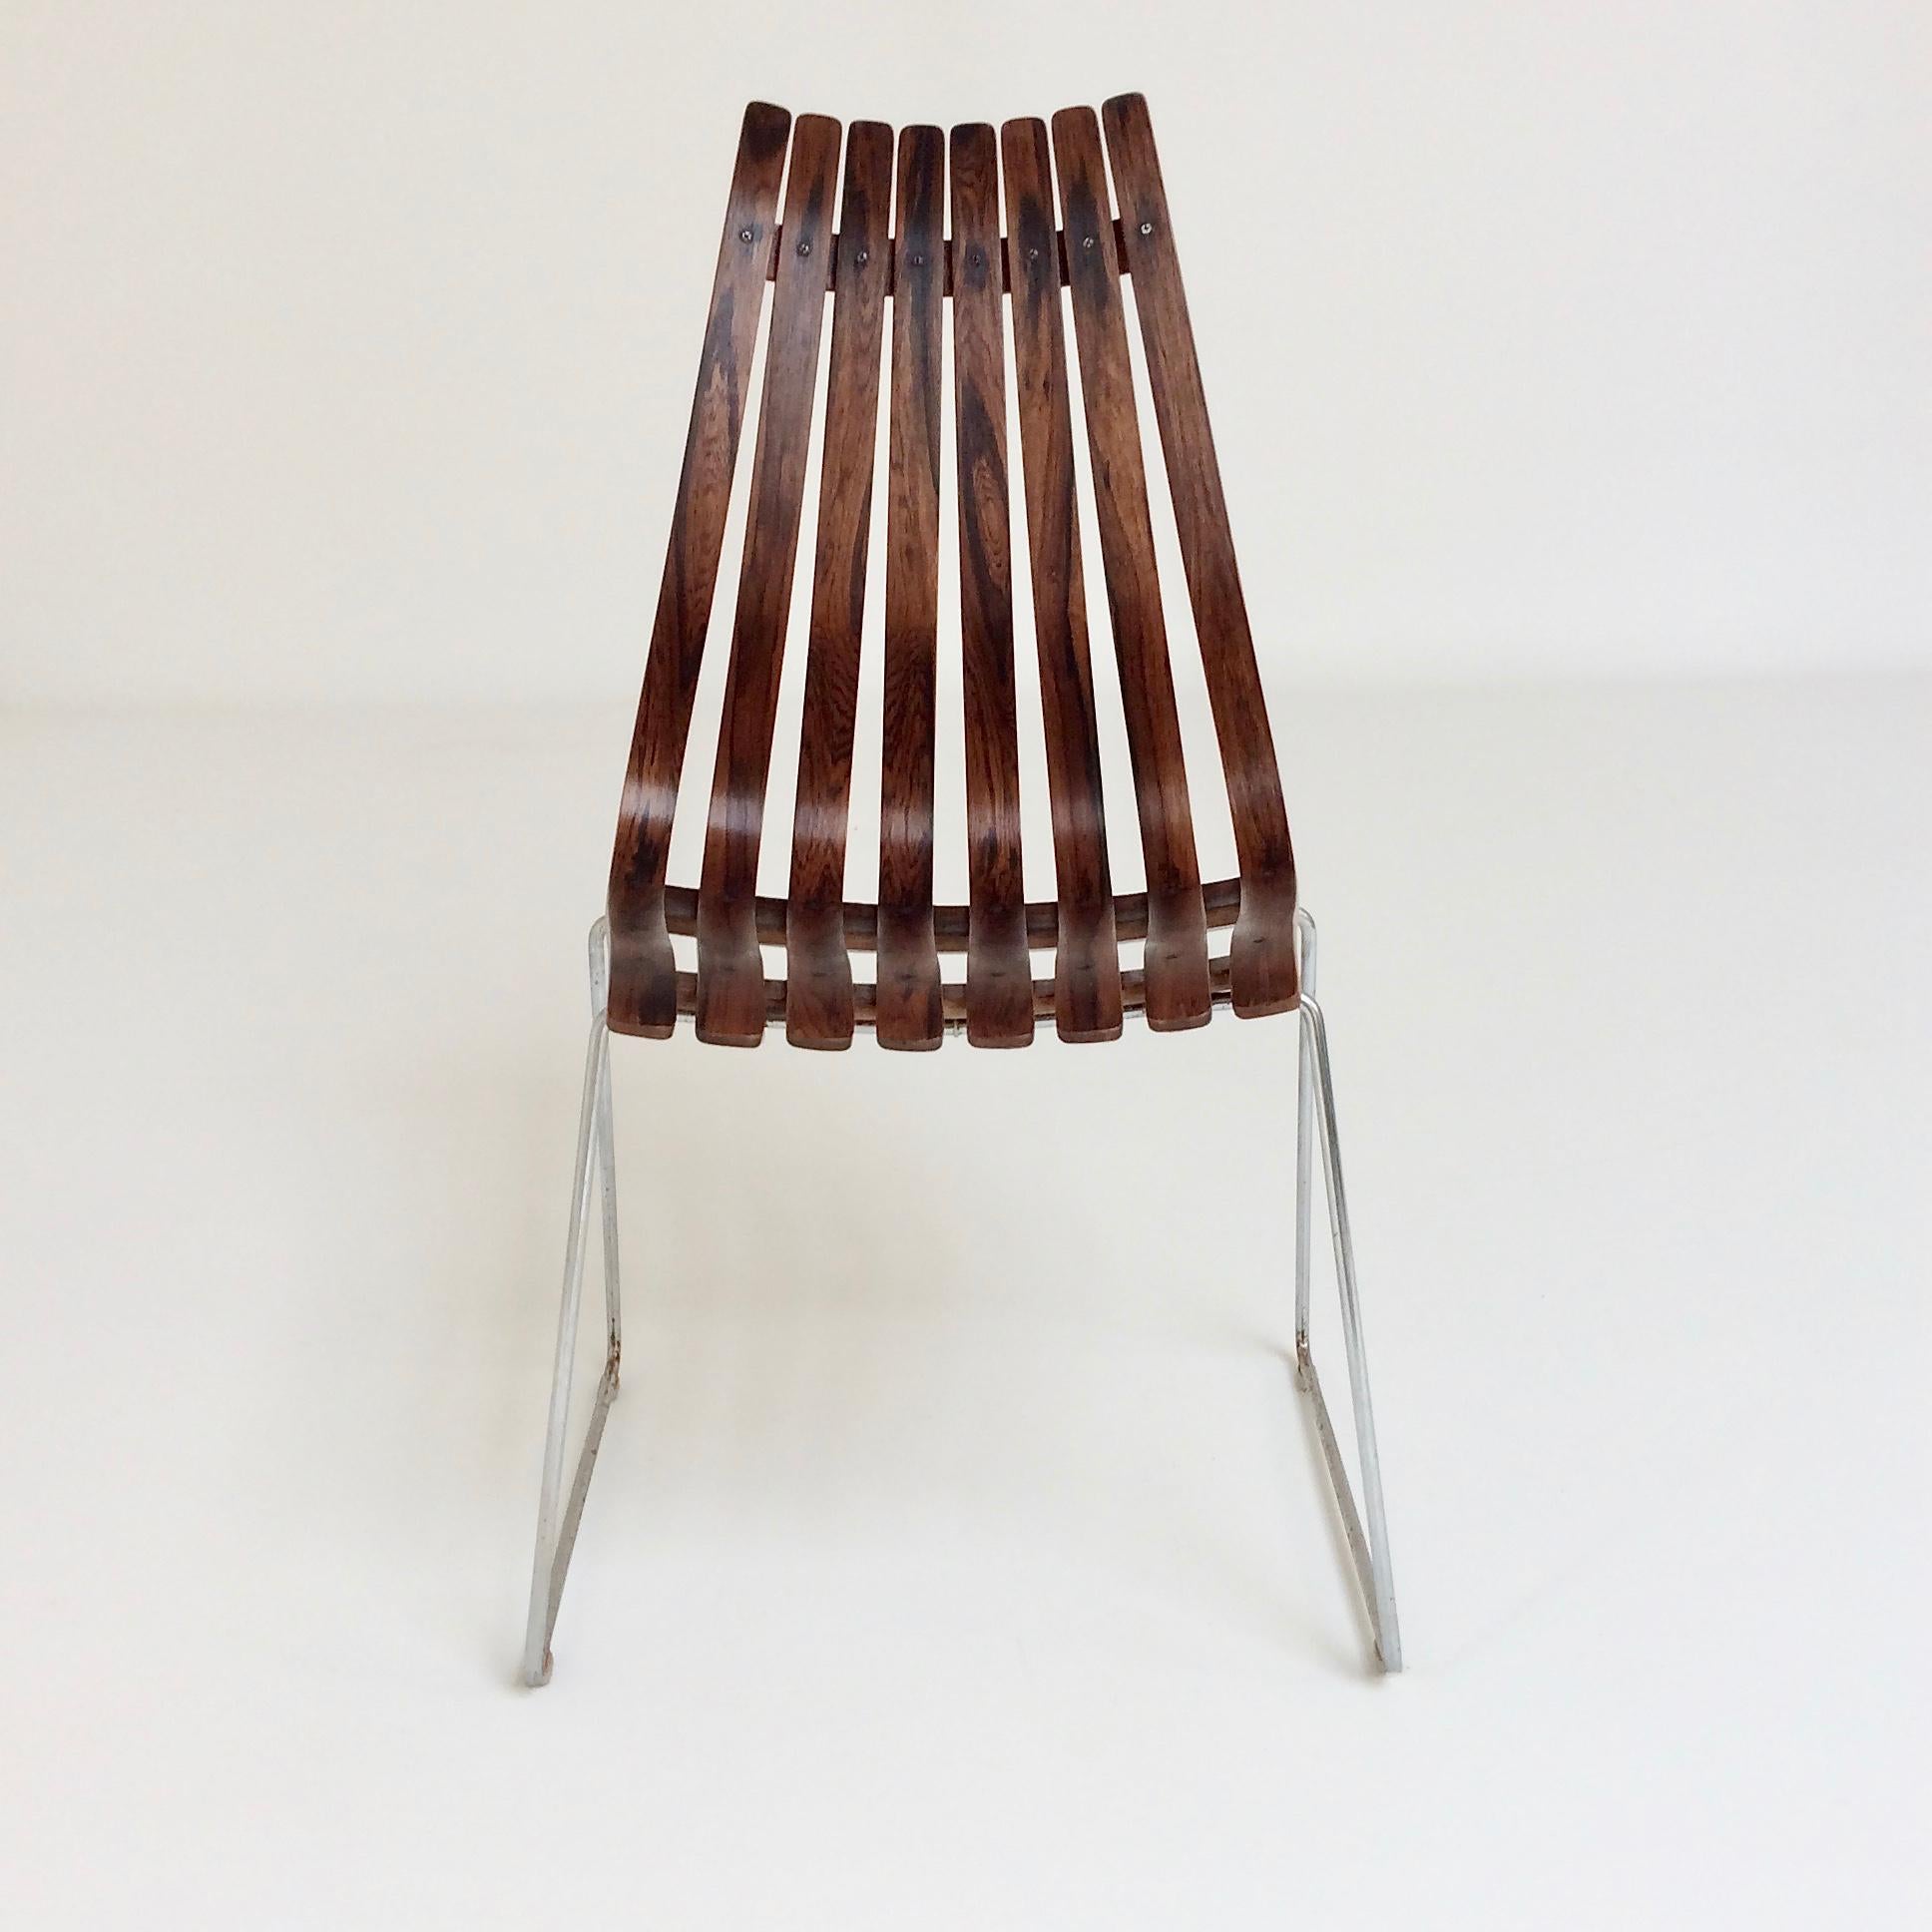 Mid-Century Modern Hans Brattrud Scandia Chair for Hove Mobler, circa 1956, Norway